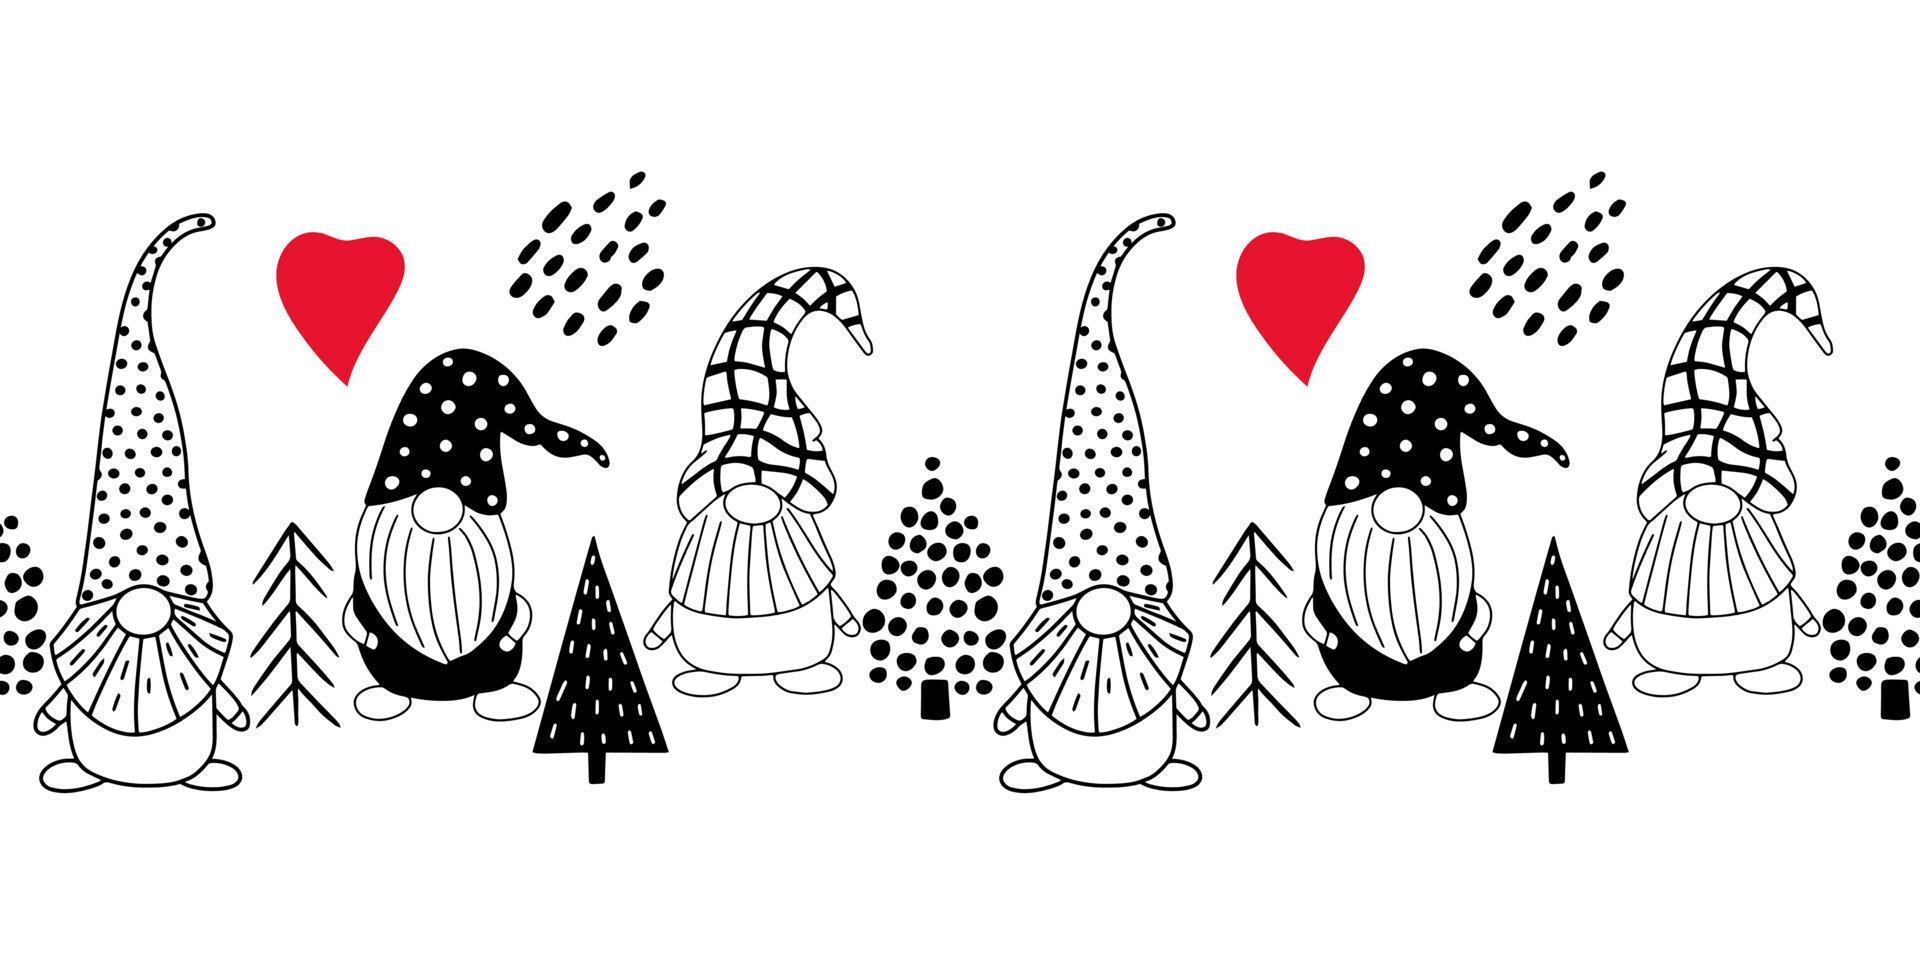 Seamless horizontal pattern with cute hand drawn gnomes and Christmas trees. A Scandinavian style vector background of doodle elements